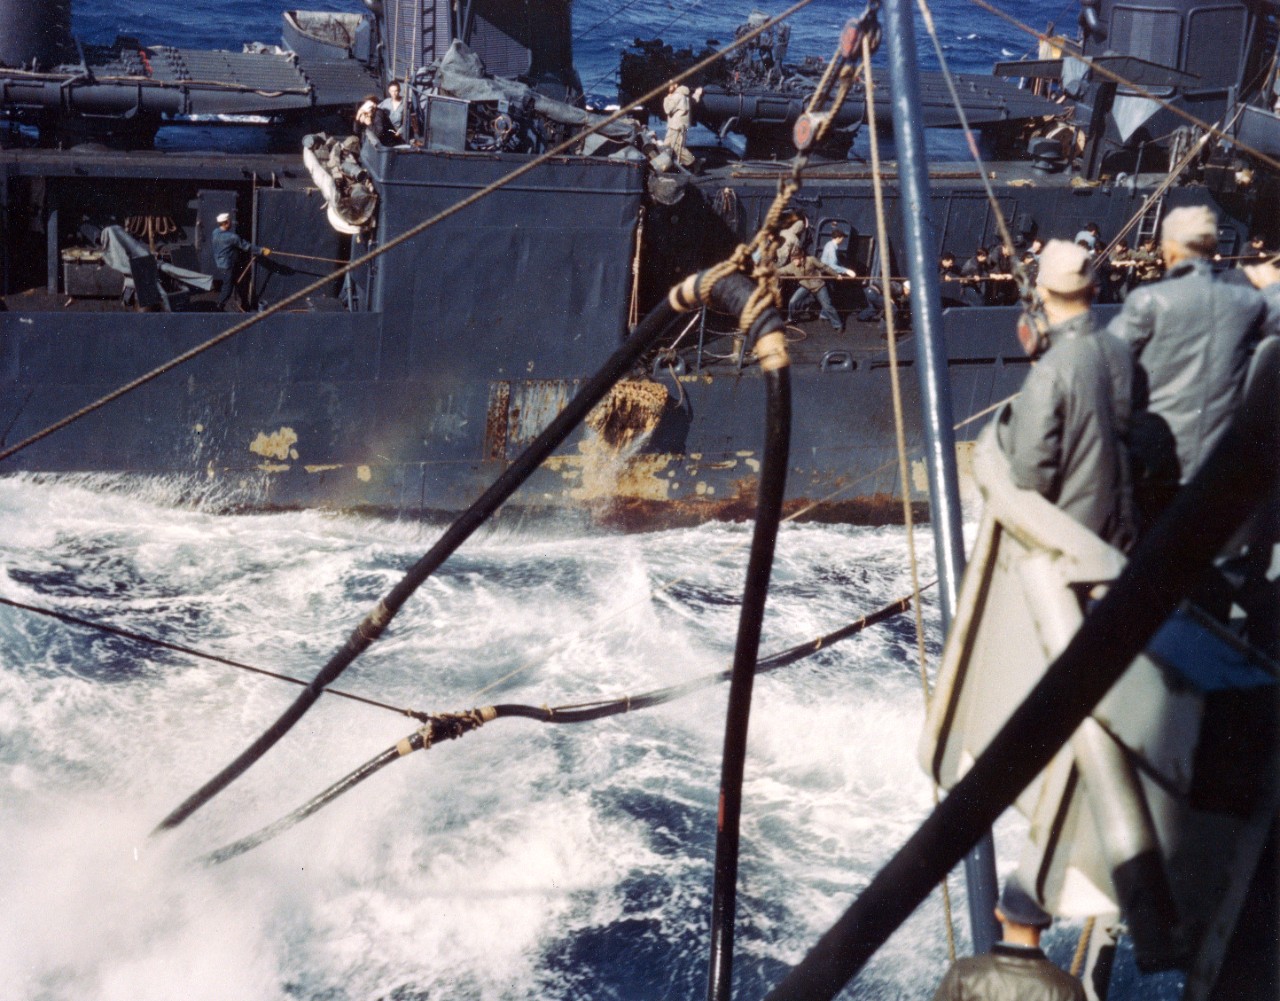 USS Halsey Powell (DD-686) prepares to refuel from USS Wisconsin (BB-64) during operations near Japan, 27 February 1945. Note line-handling party hauling in, and chipped paint near the waterline.